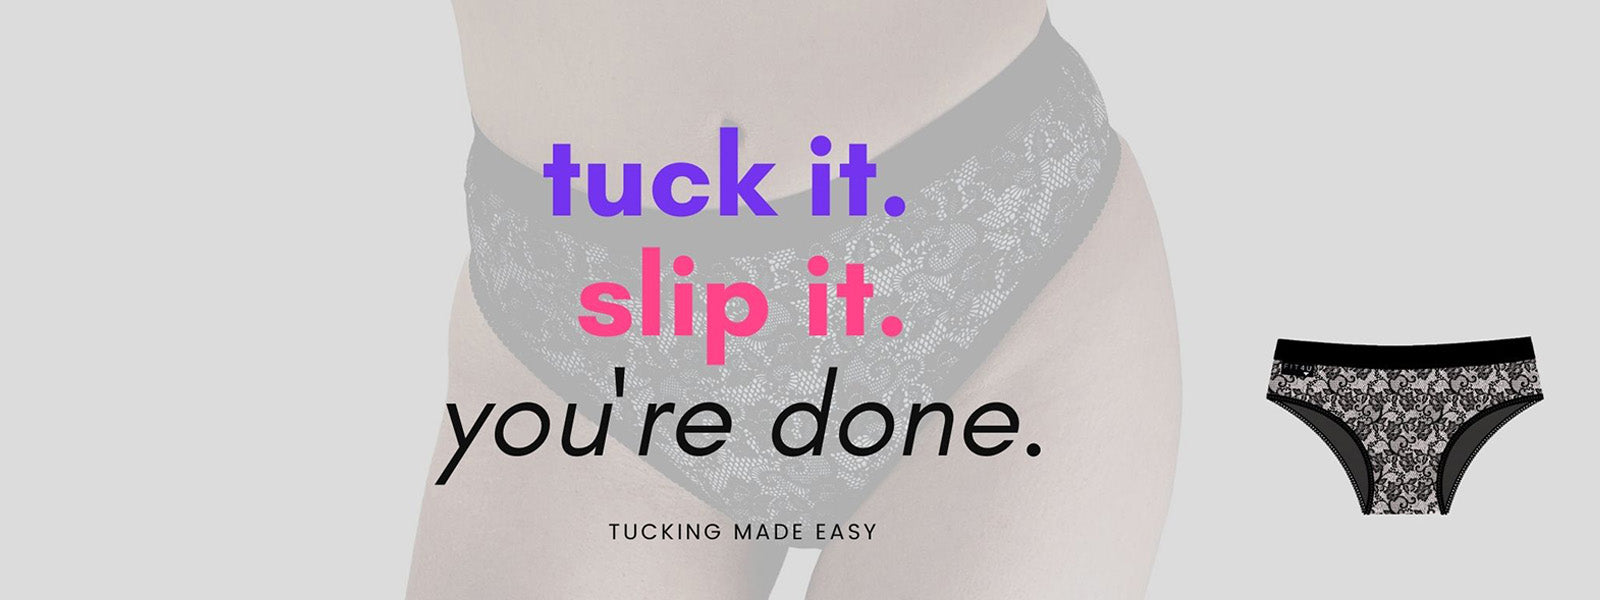 Tucking, made easy. Tuck it picture image